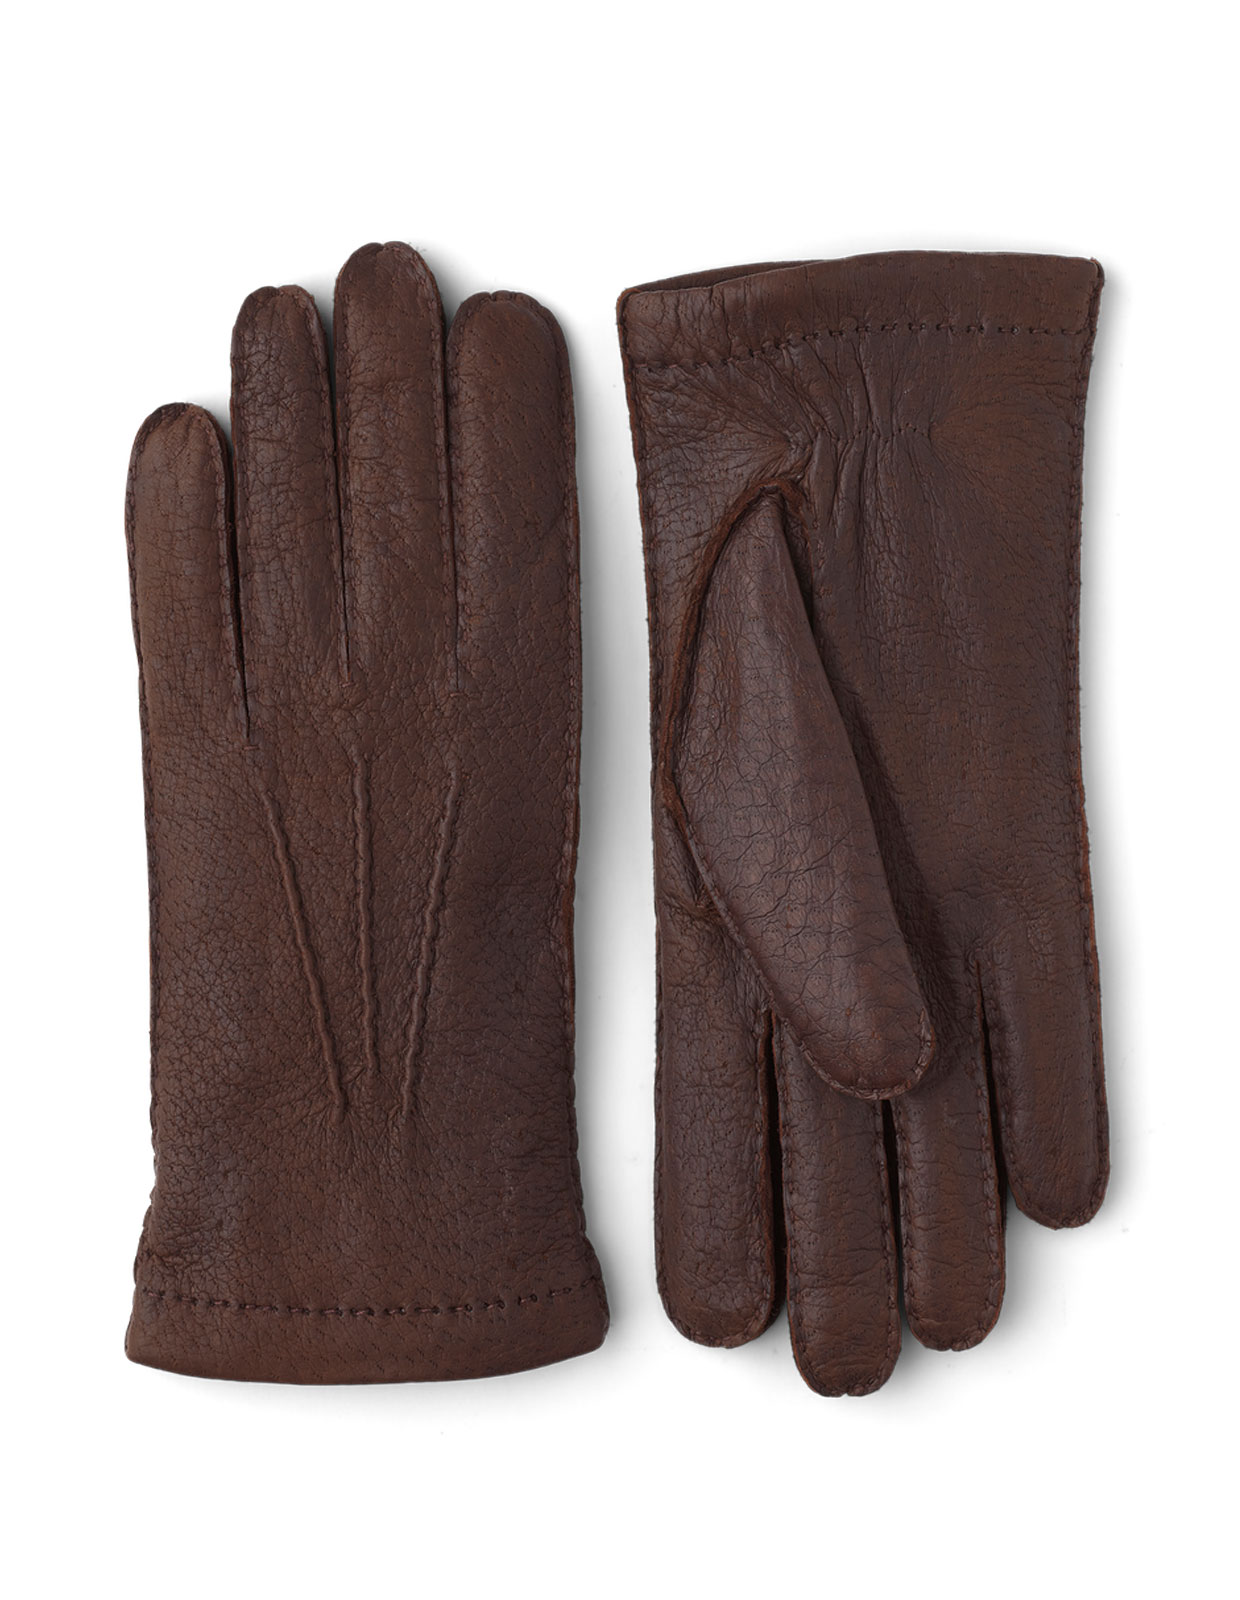 Peccary Handsewn Cashmere Lined Gloves Siena Stl 10